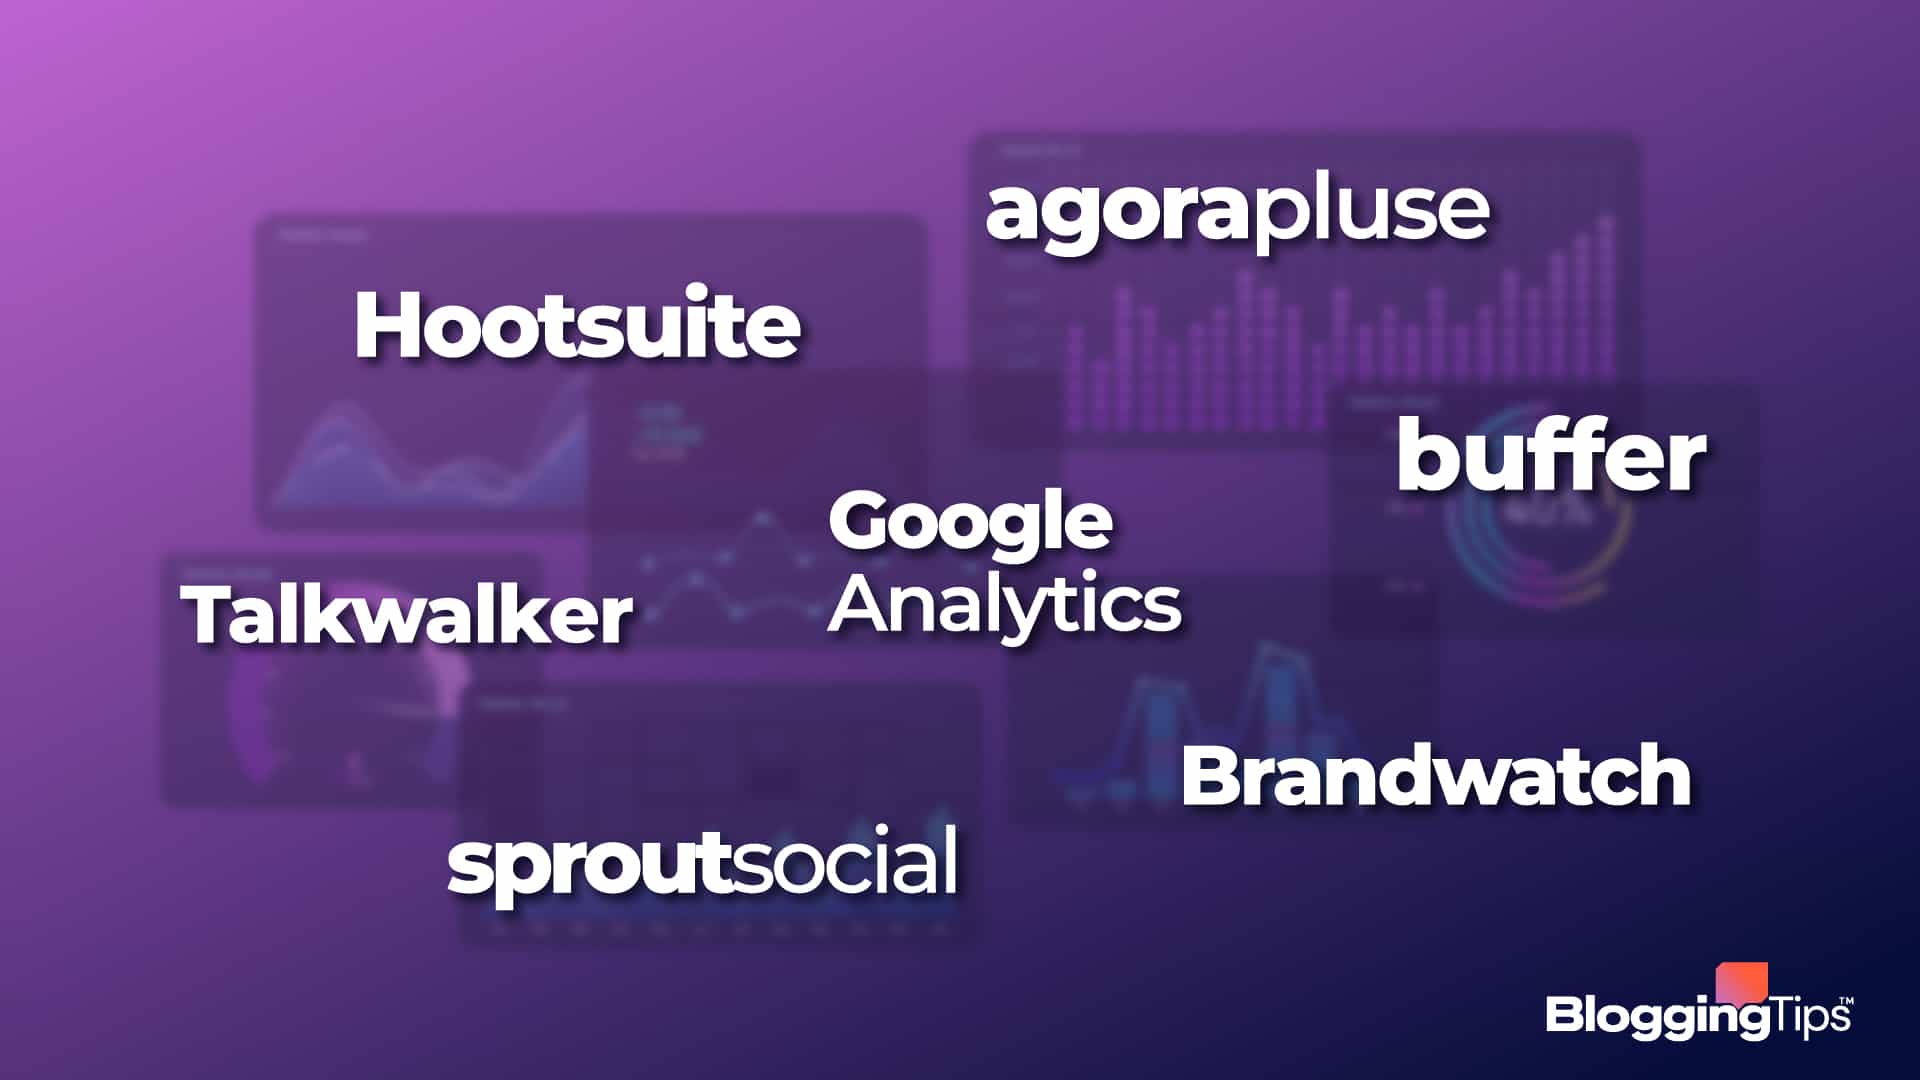 vector graphic showing an illustration of the social media analytics tools